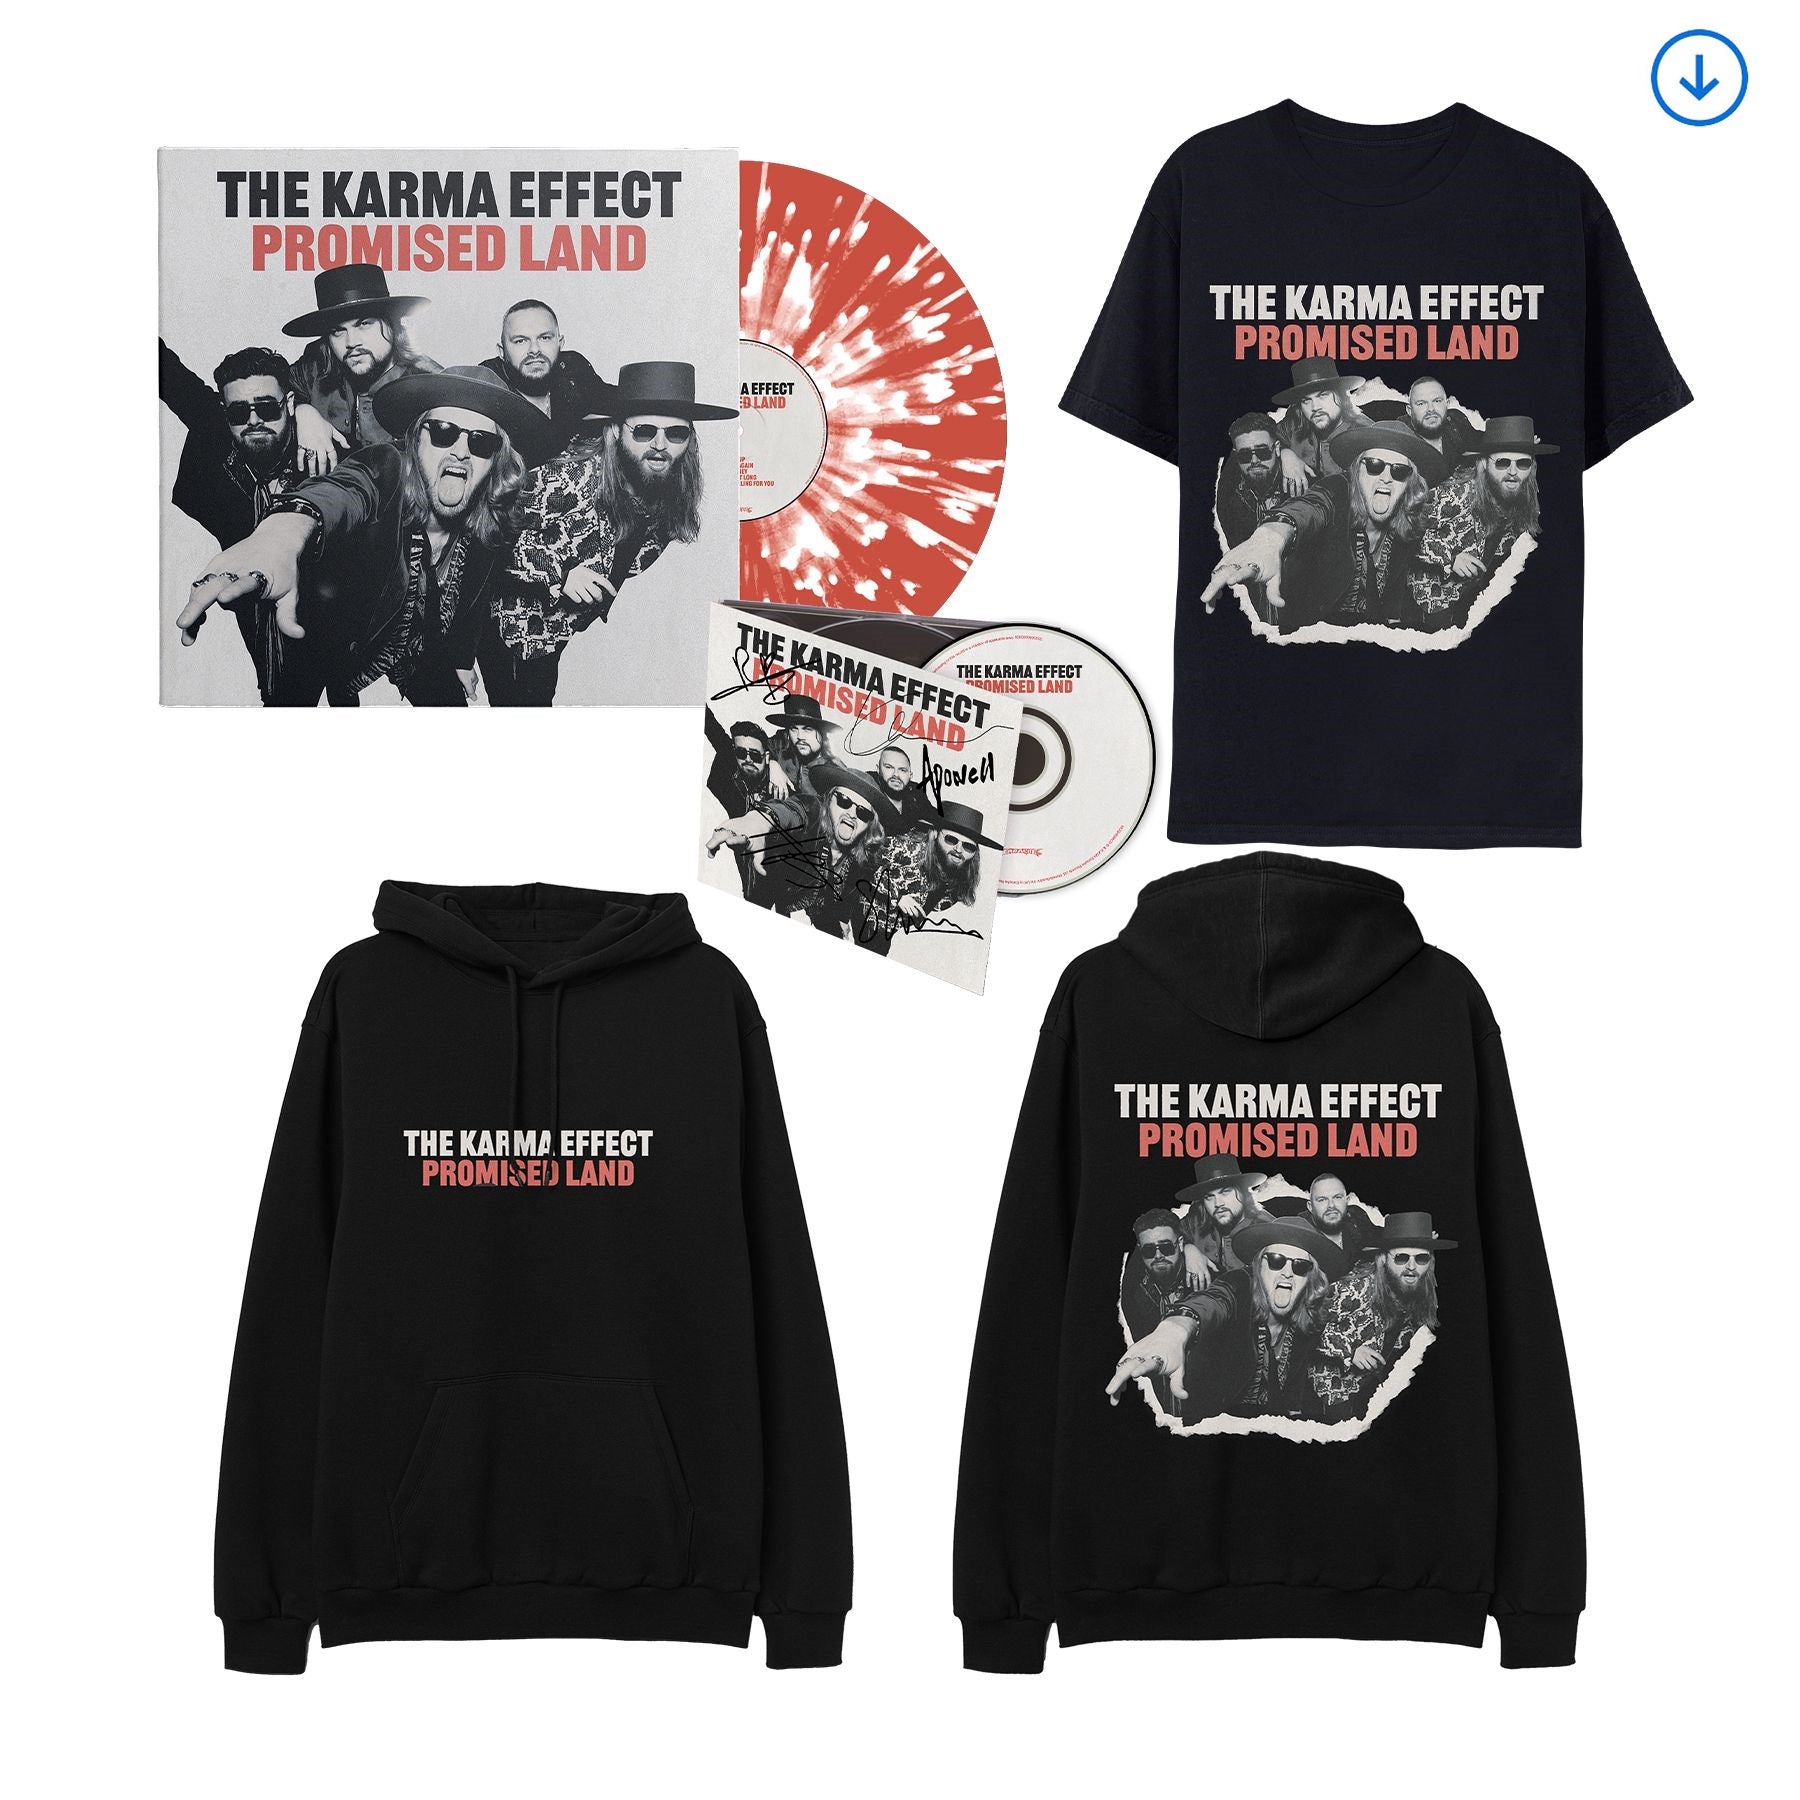 The Karma Effect "Promised Land" Splatter Vinyl, Signed CD, Download, T shirt and Hoodie